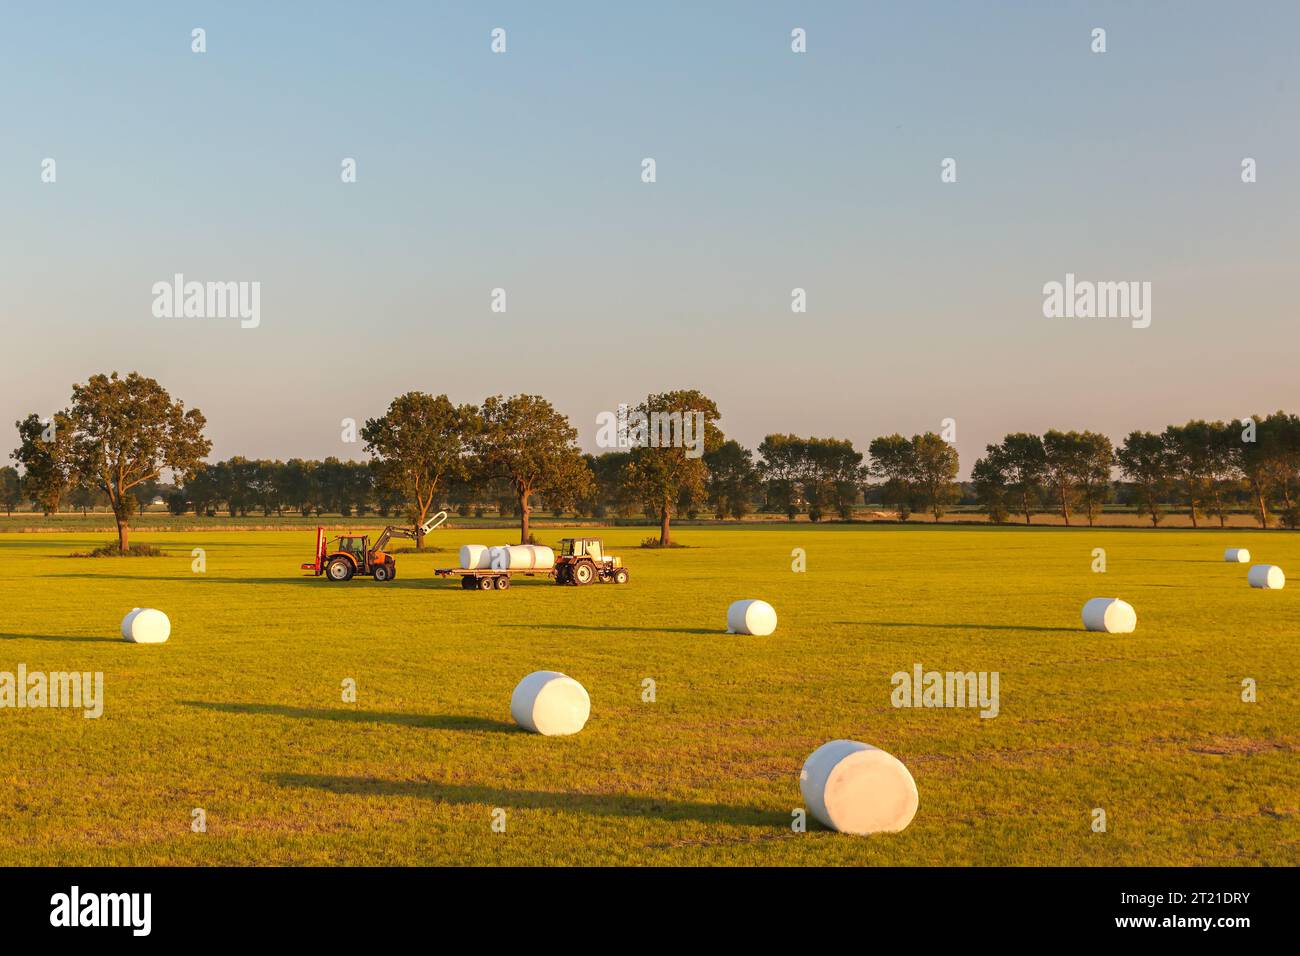 Silage harvest with tractors in Gelderland, The Netherlands Stock Photo